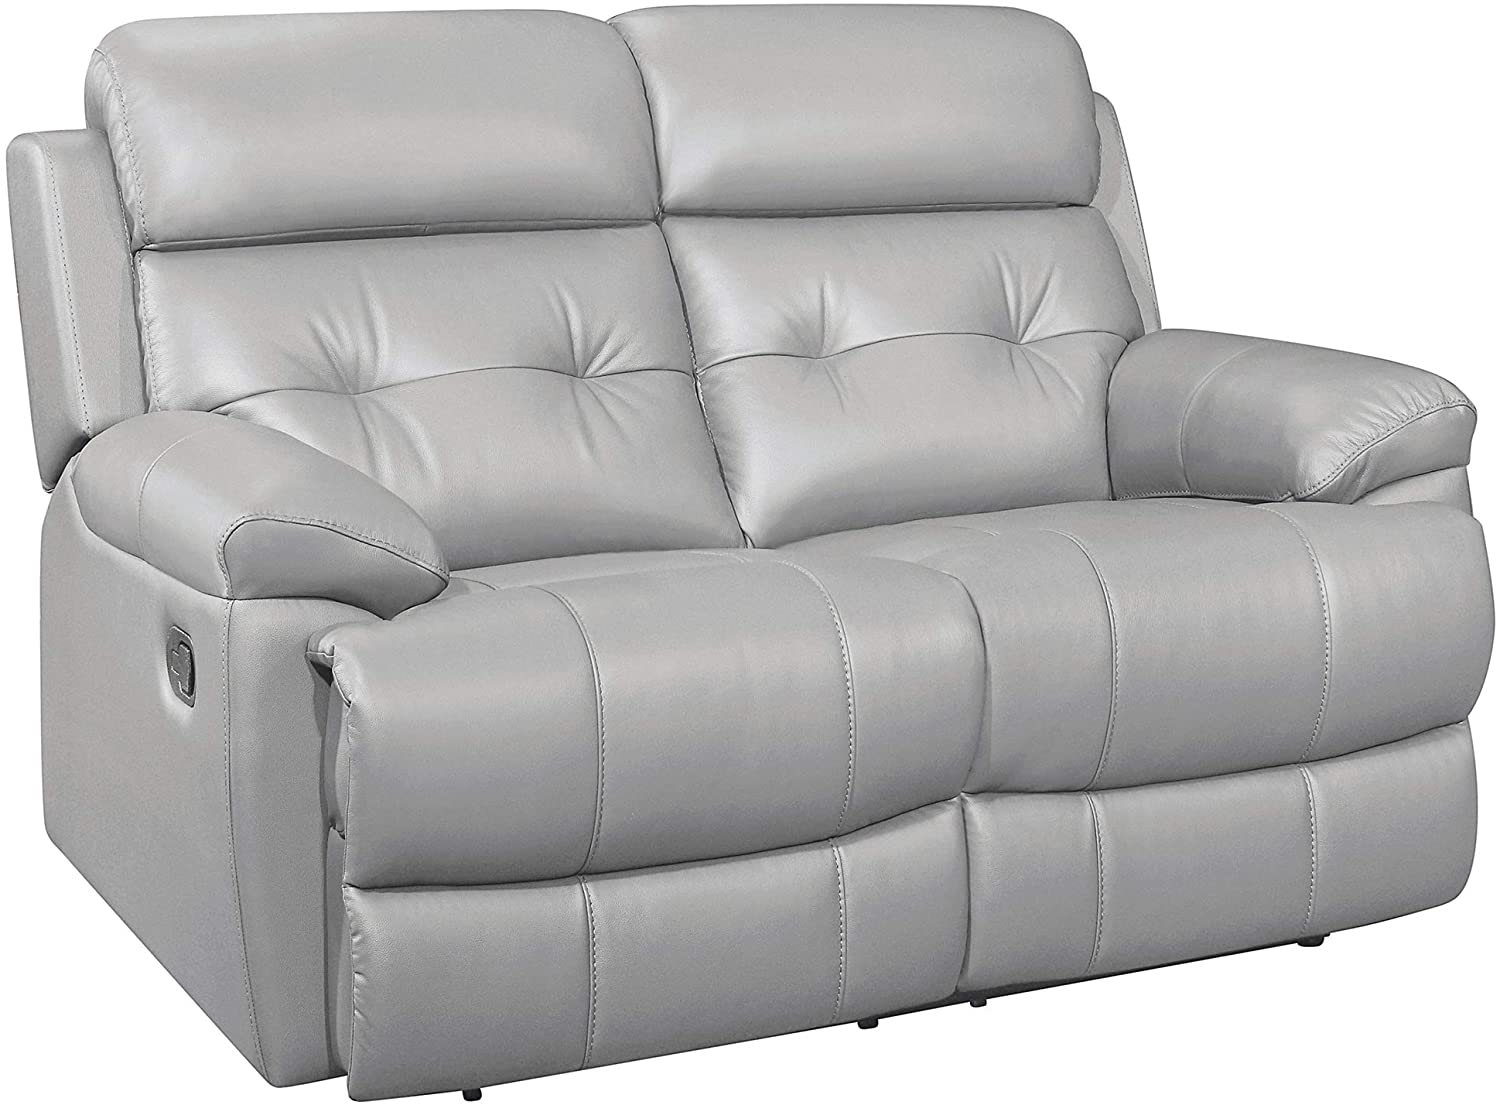 Homelegance Manual Double Reclining Loveseat